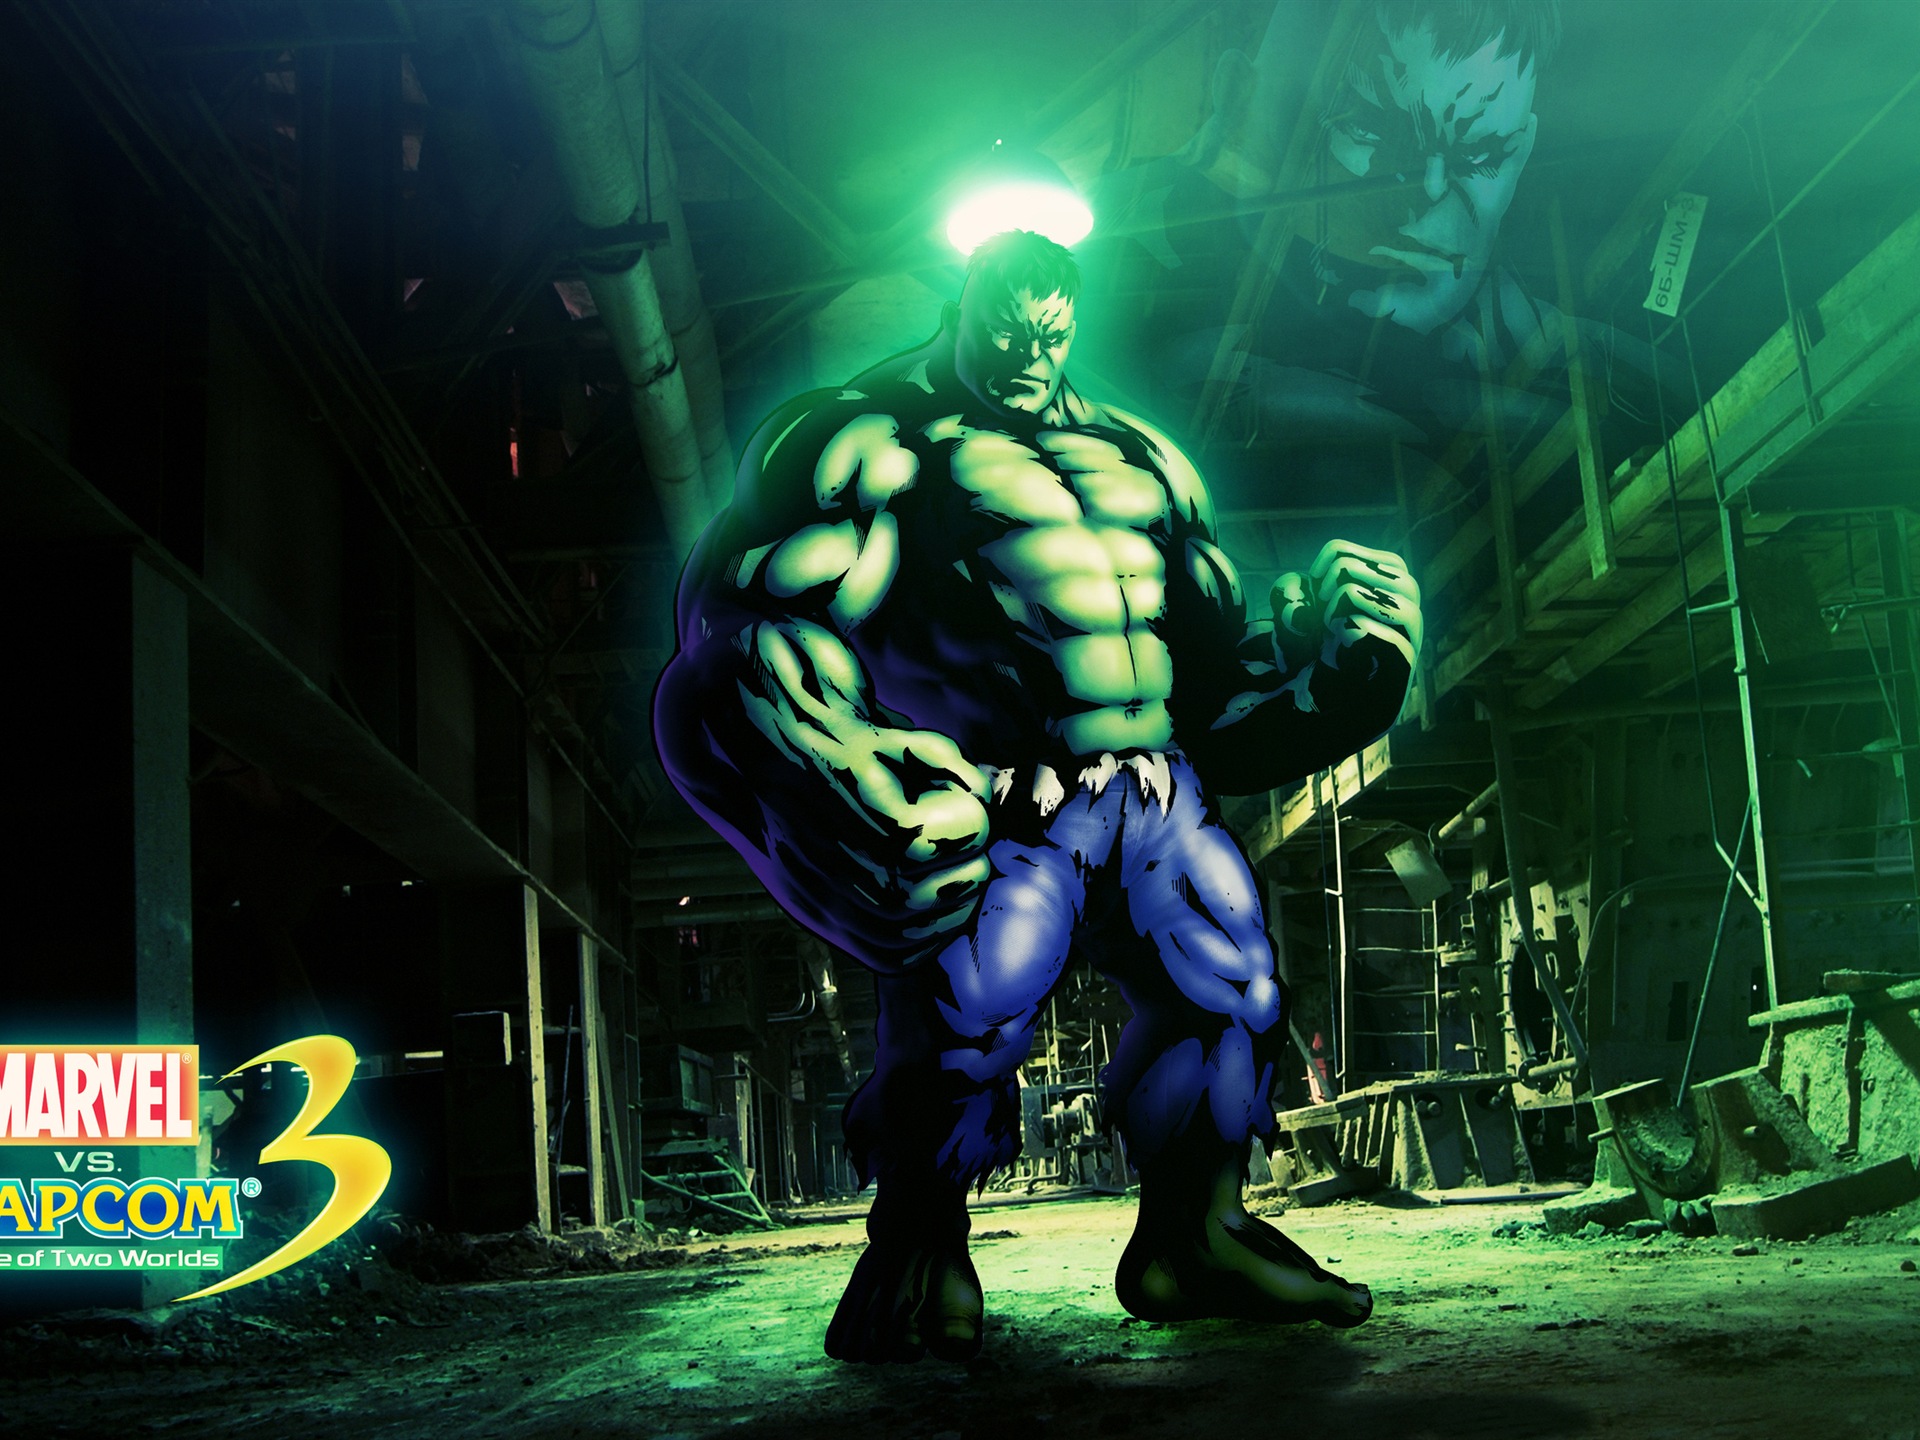 Marvel VS. Capcom 3: Fate of Two Worlds wallpapers HD herní #11 - 1920x1440